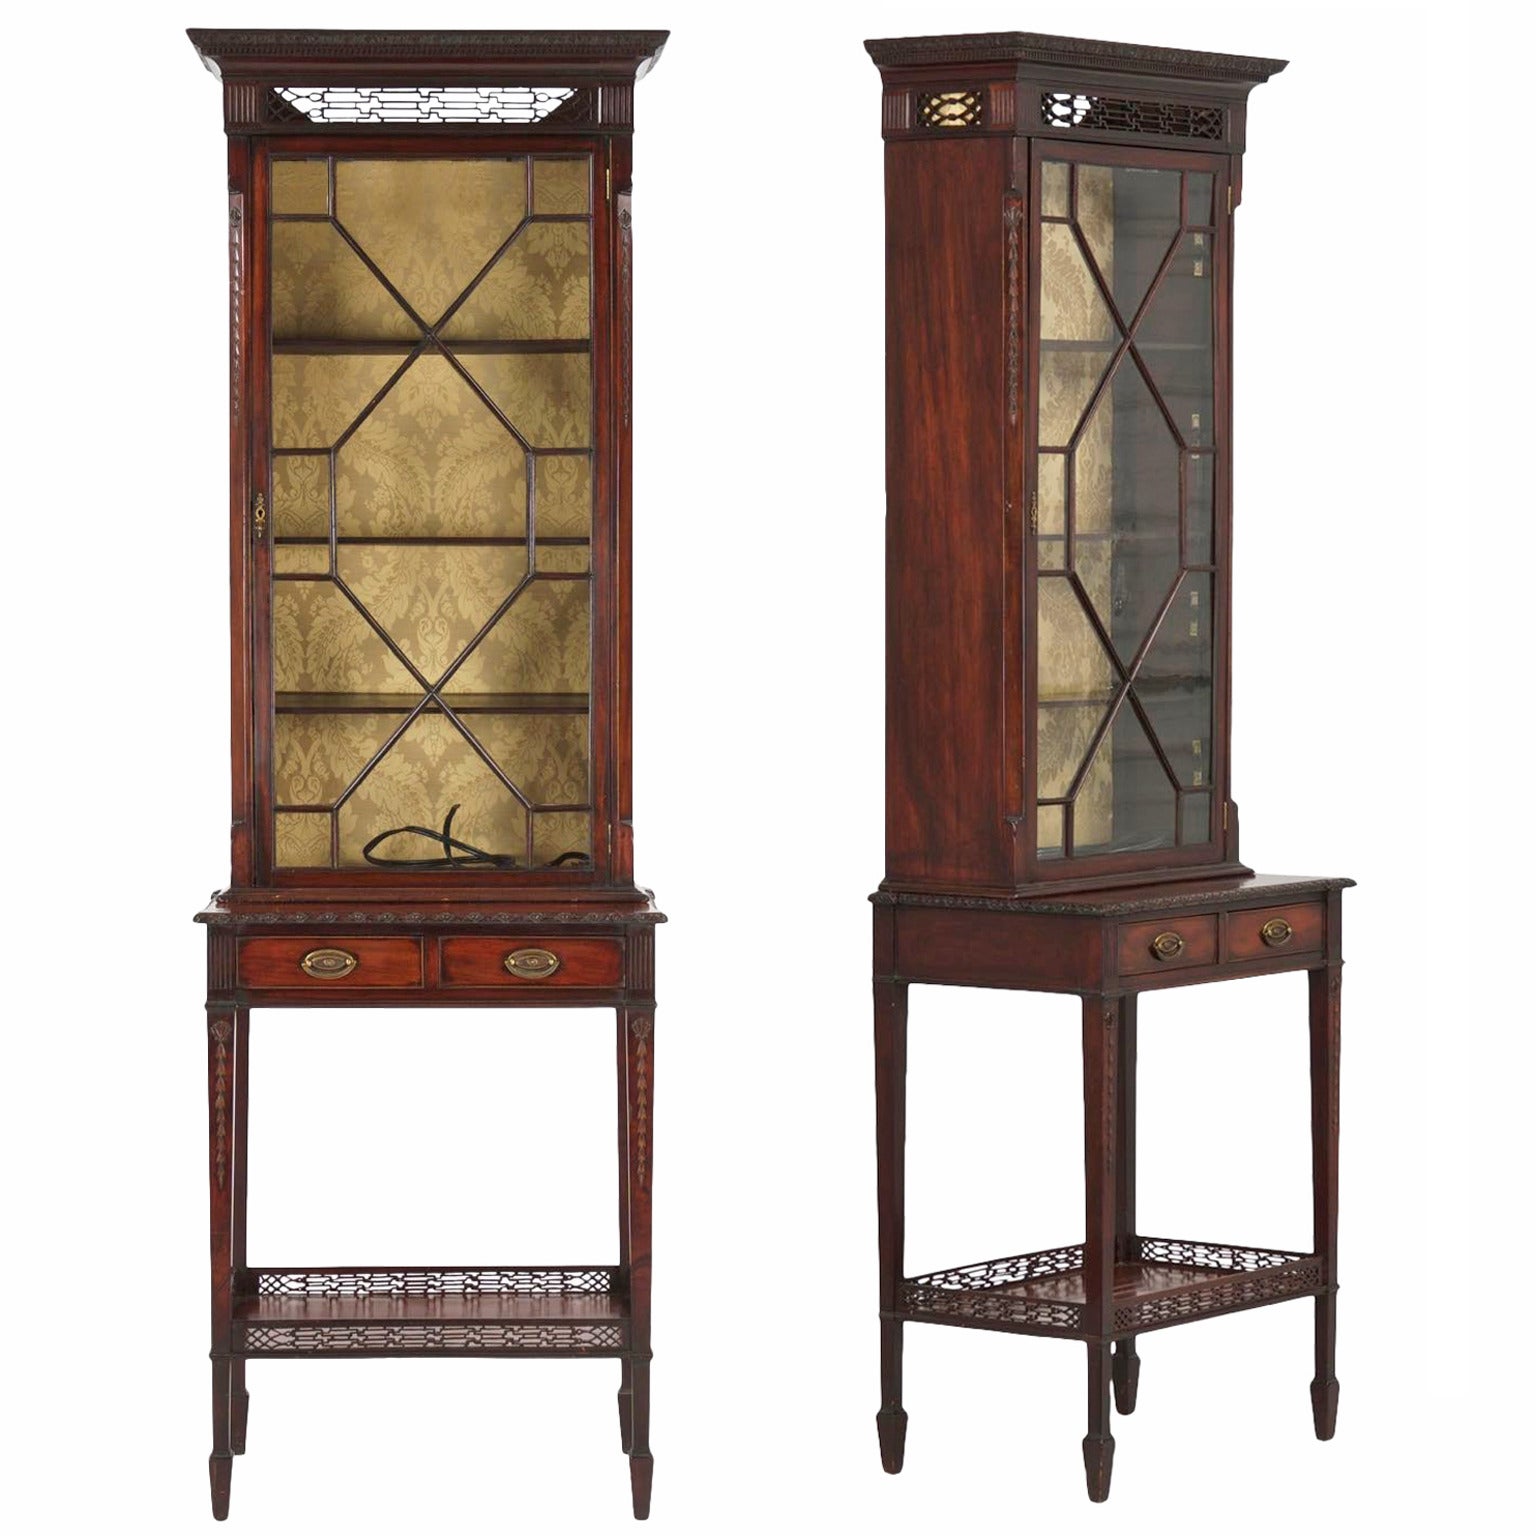 Rare Pair of Chinese Chippendale Style Curio Cabinets or Bookshelves, circa 1880